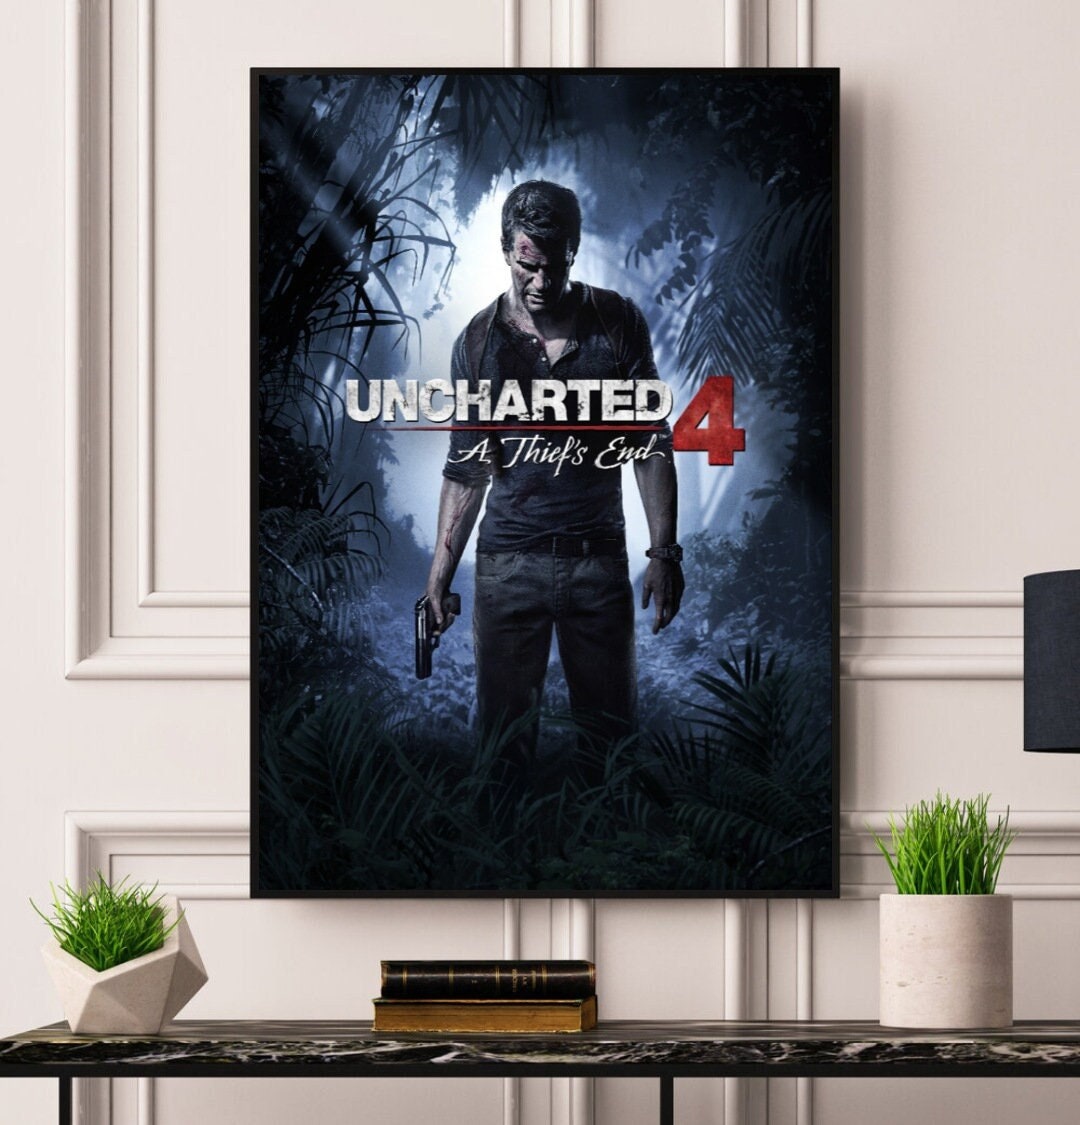 Uncharted 3 Drake's Deception PS3 Ps4 Promo Poster / Ad Art Print  Advertisement